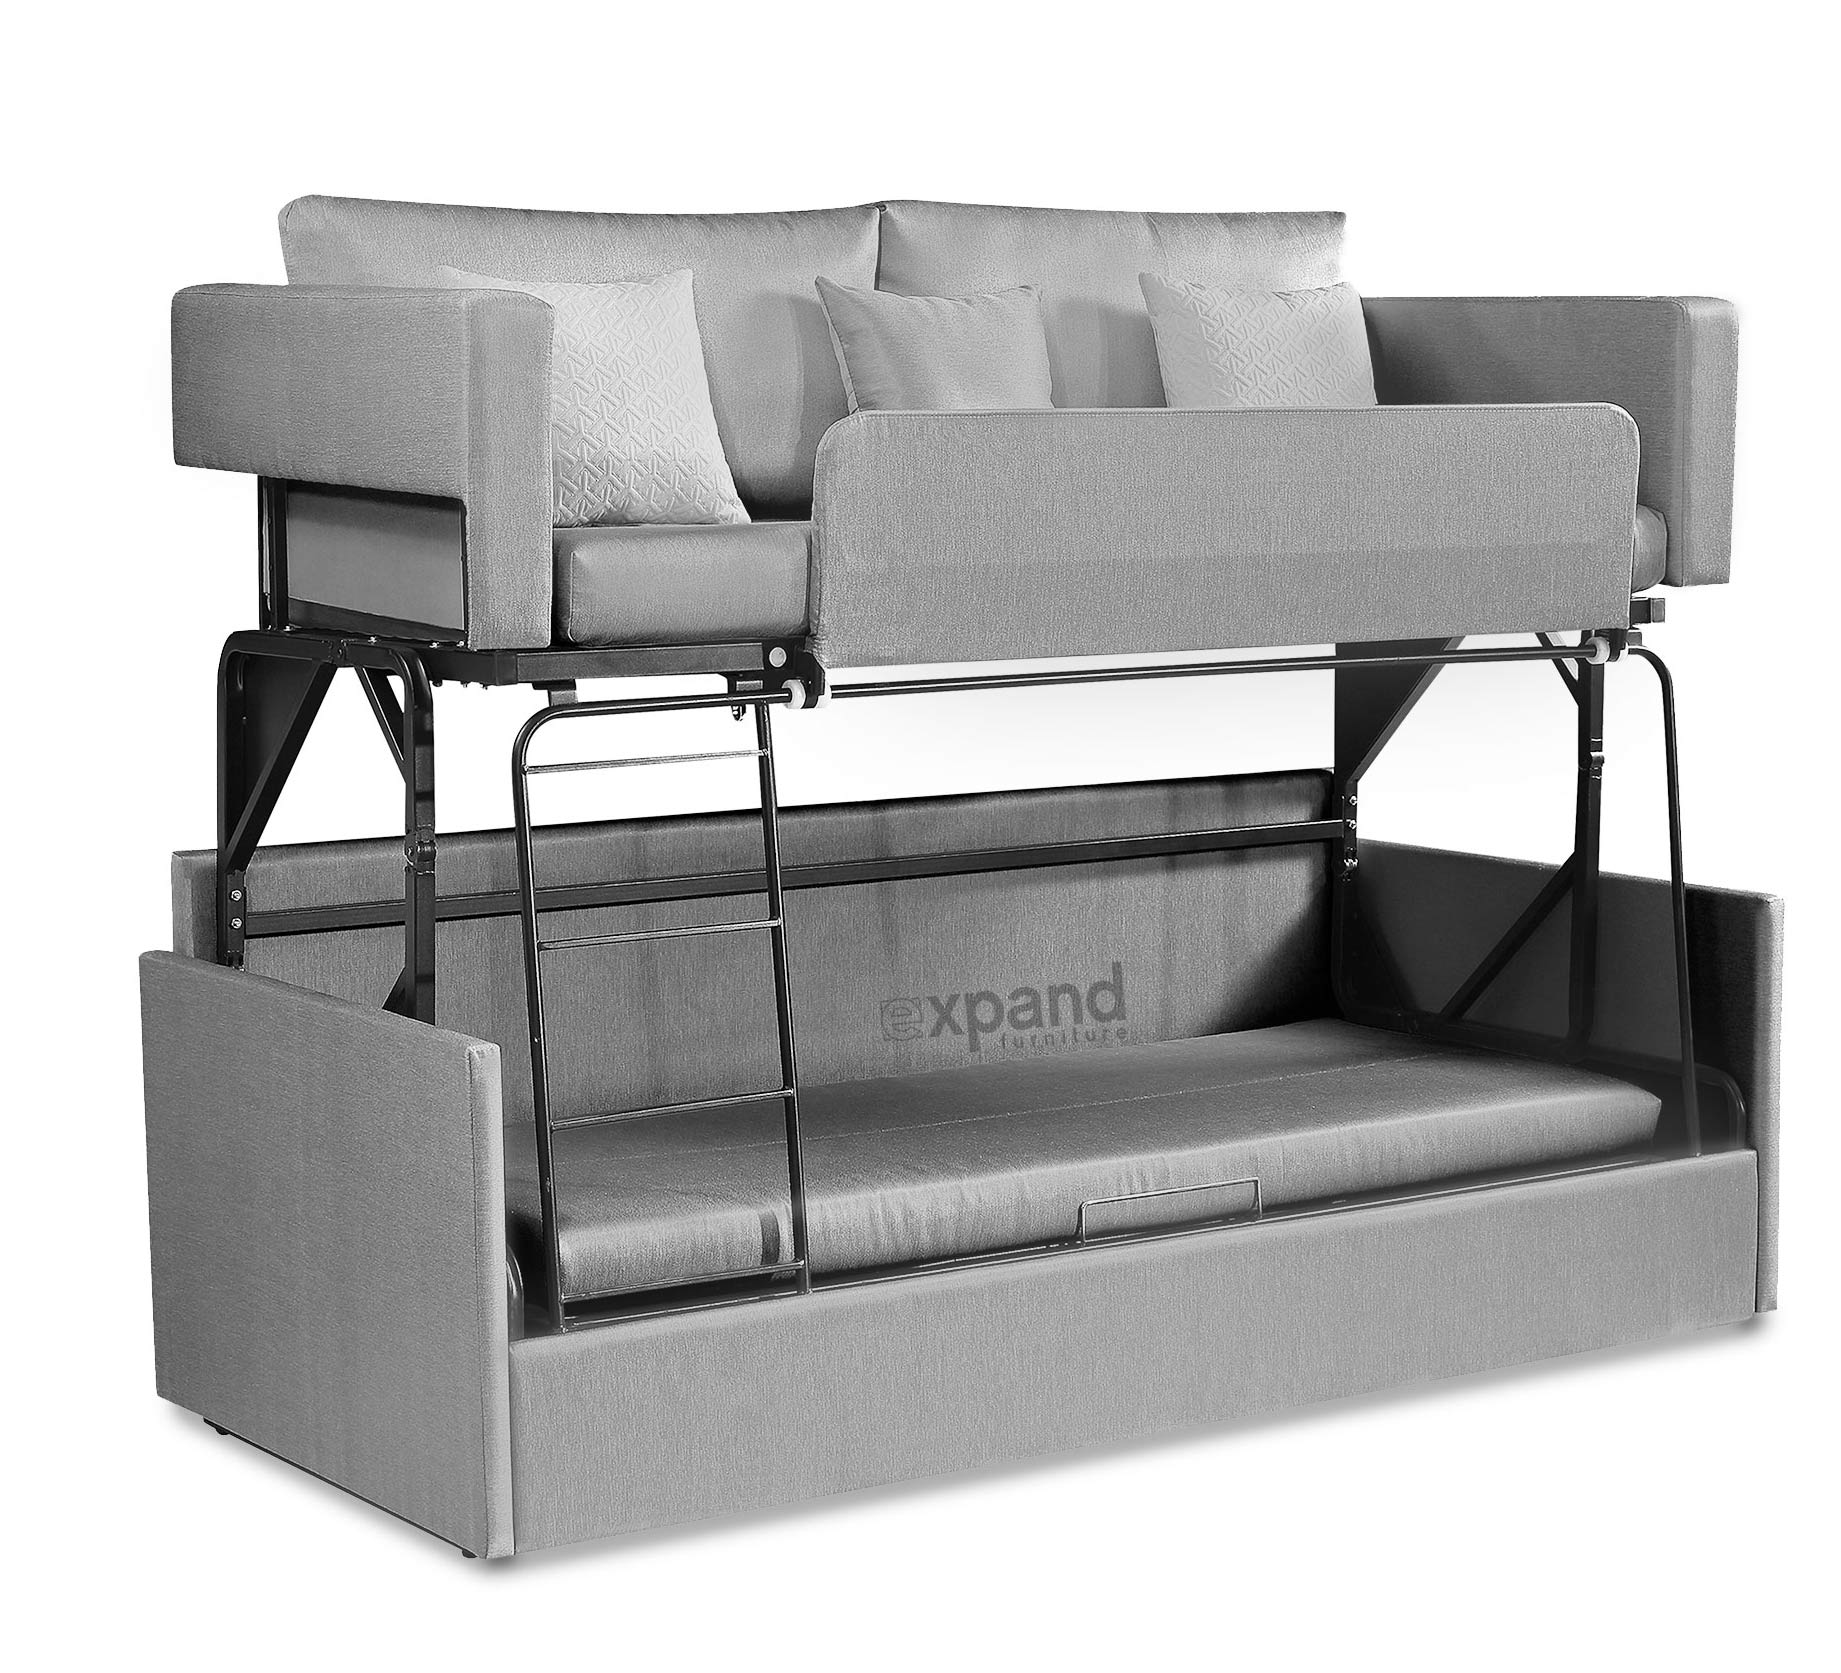 Kilimanjaro kleinhandel een experiment doen Double Decker Couch real life version can be purchased - Expand Furniture -  Folding Tables, Smarter Wall Beds, Space Savers